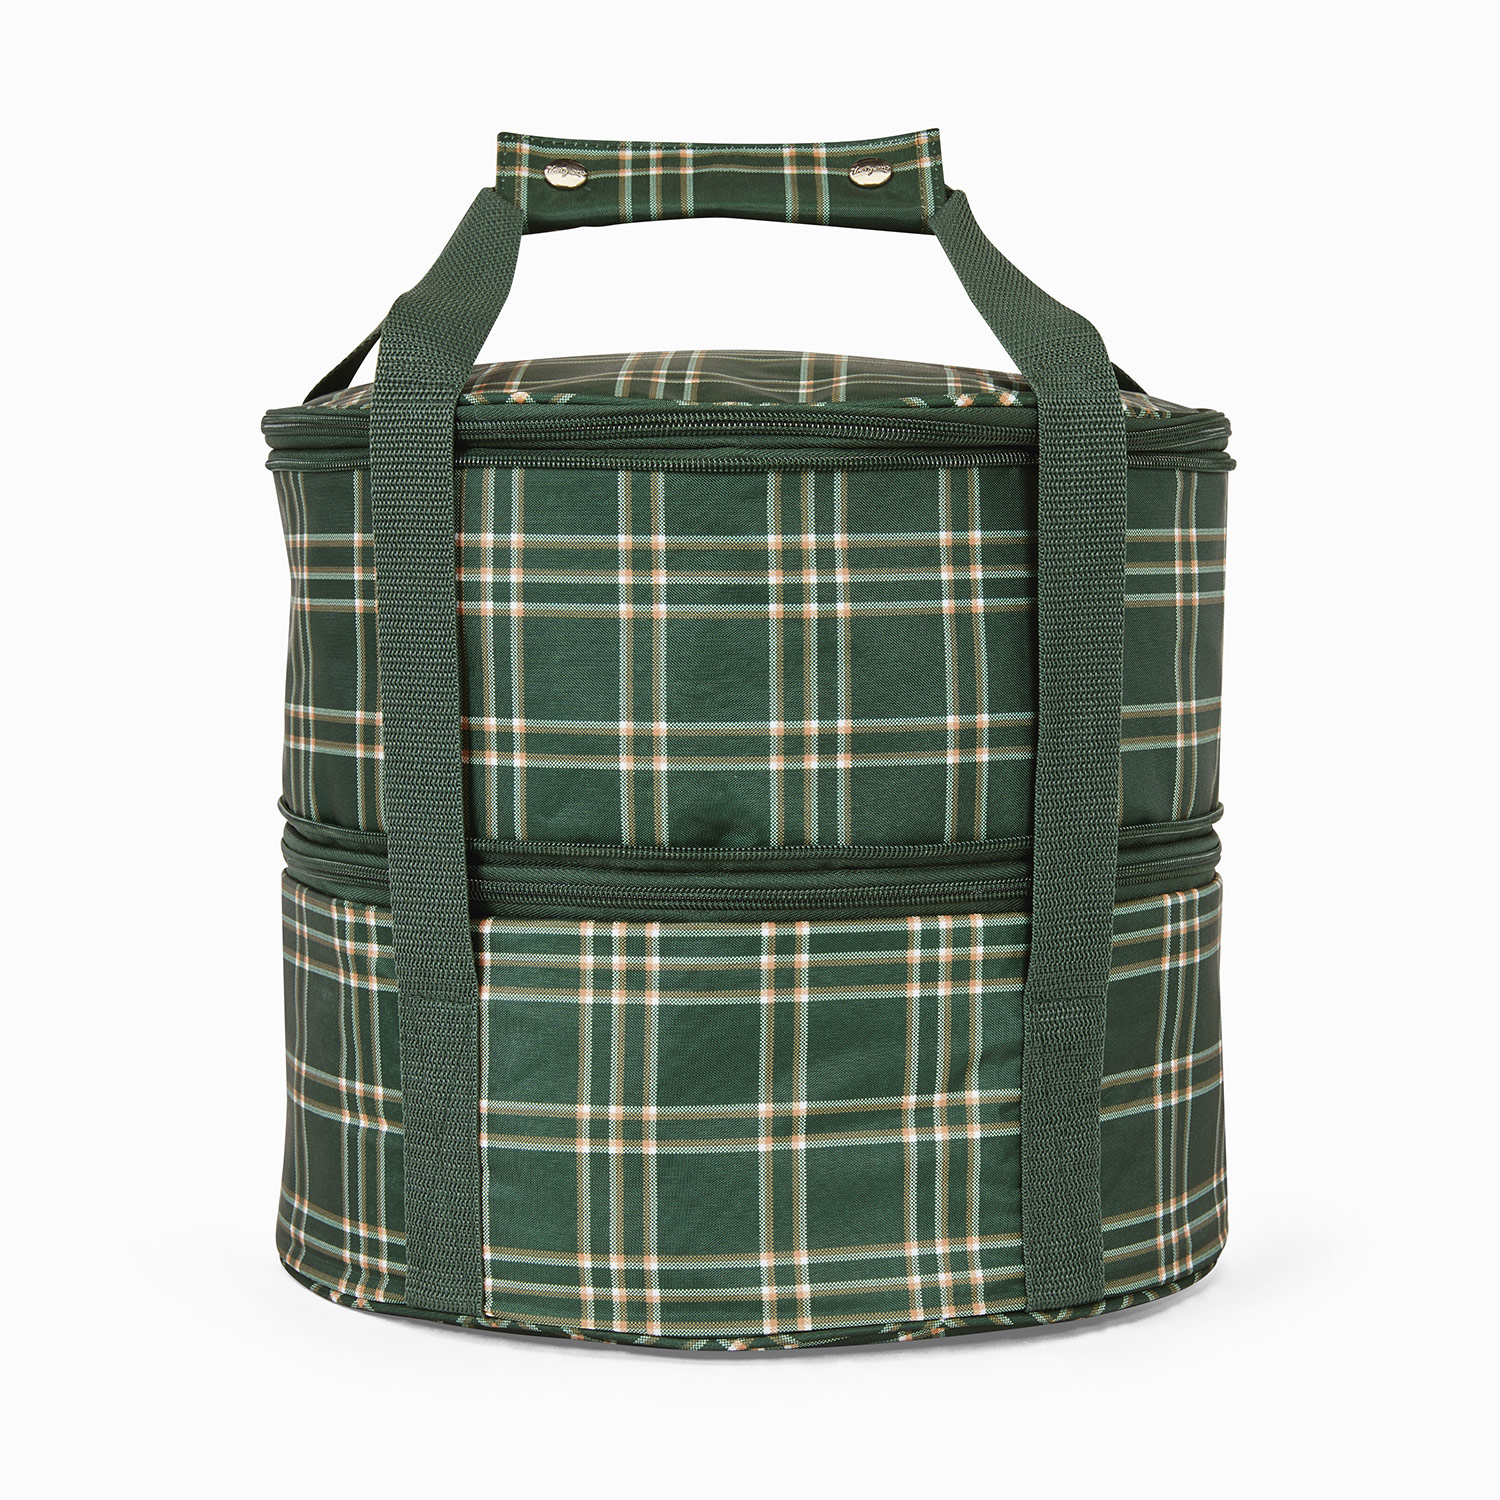 Thermal Lunch Bag Plaid Pattern Lunch Box Storage Bag Pouch Green